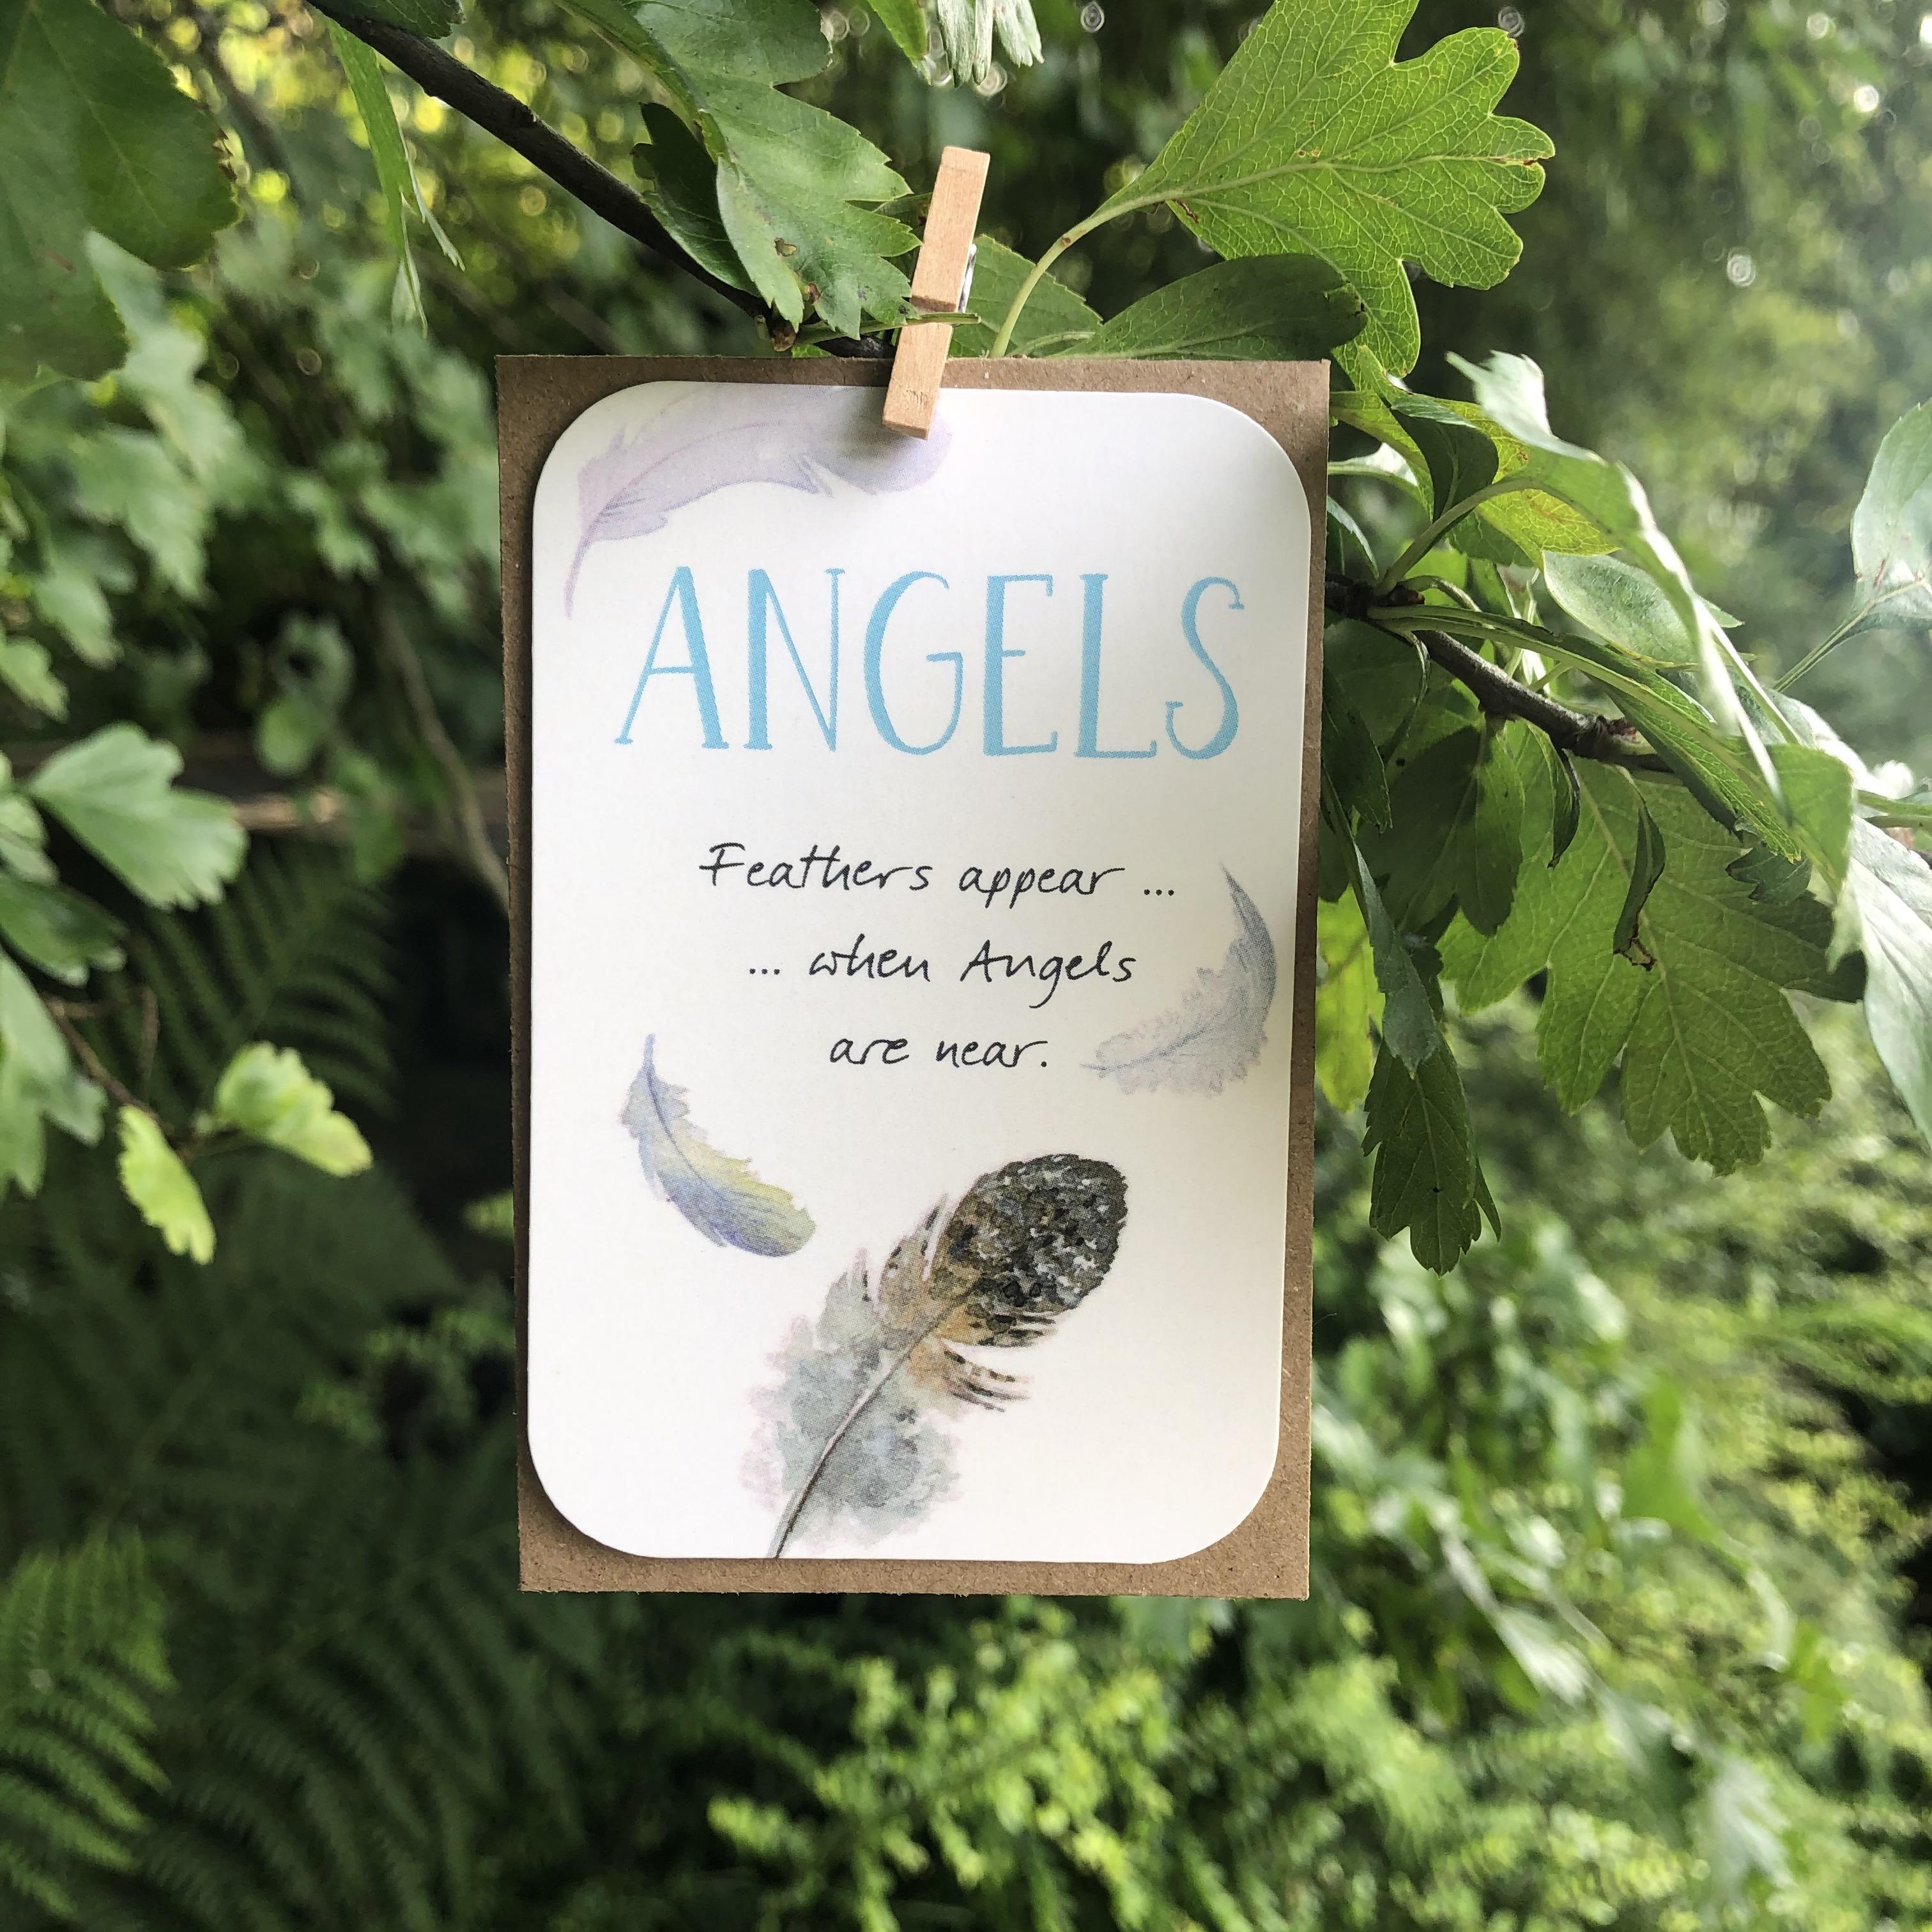 A small keepsake card with an 'Angels' and ‘Feathers’ caption, and lovely little verse